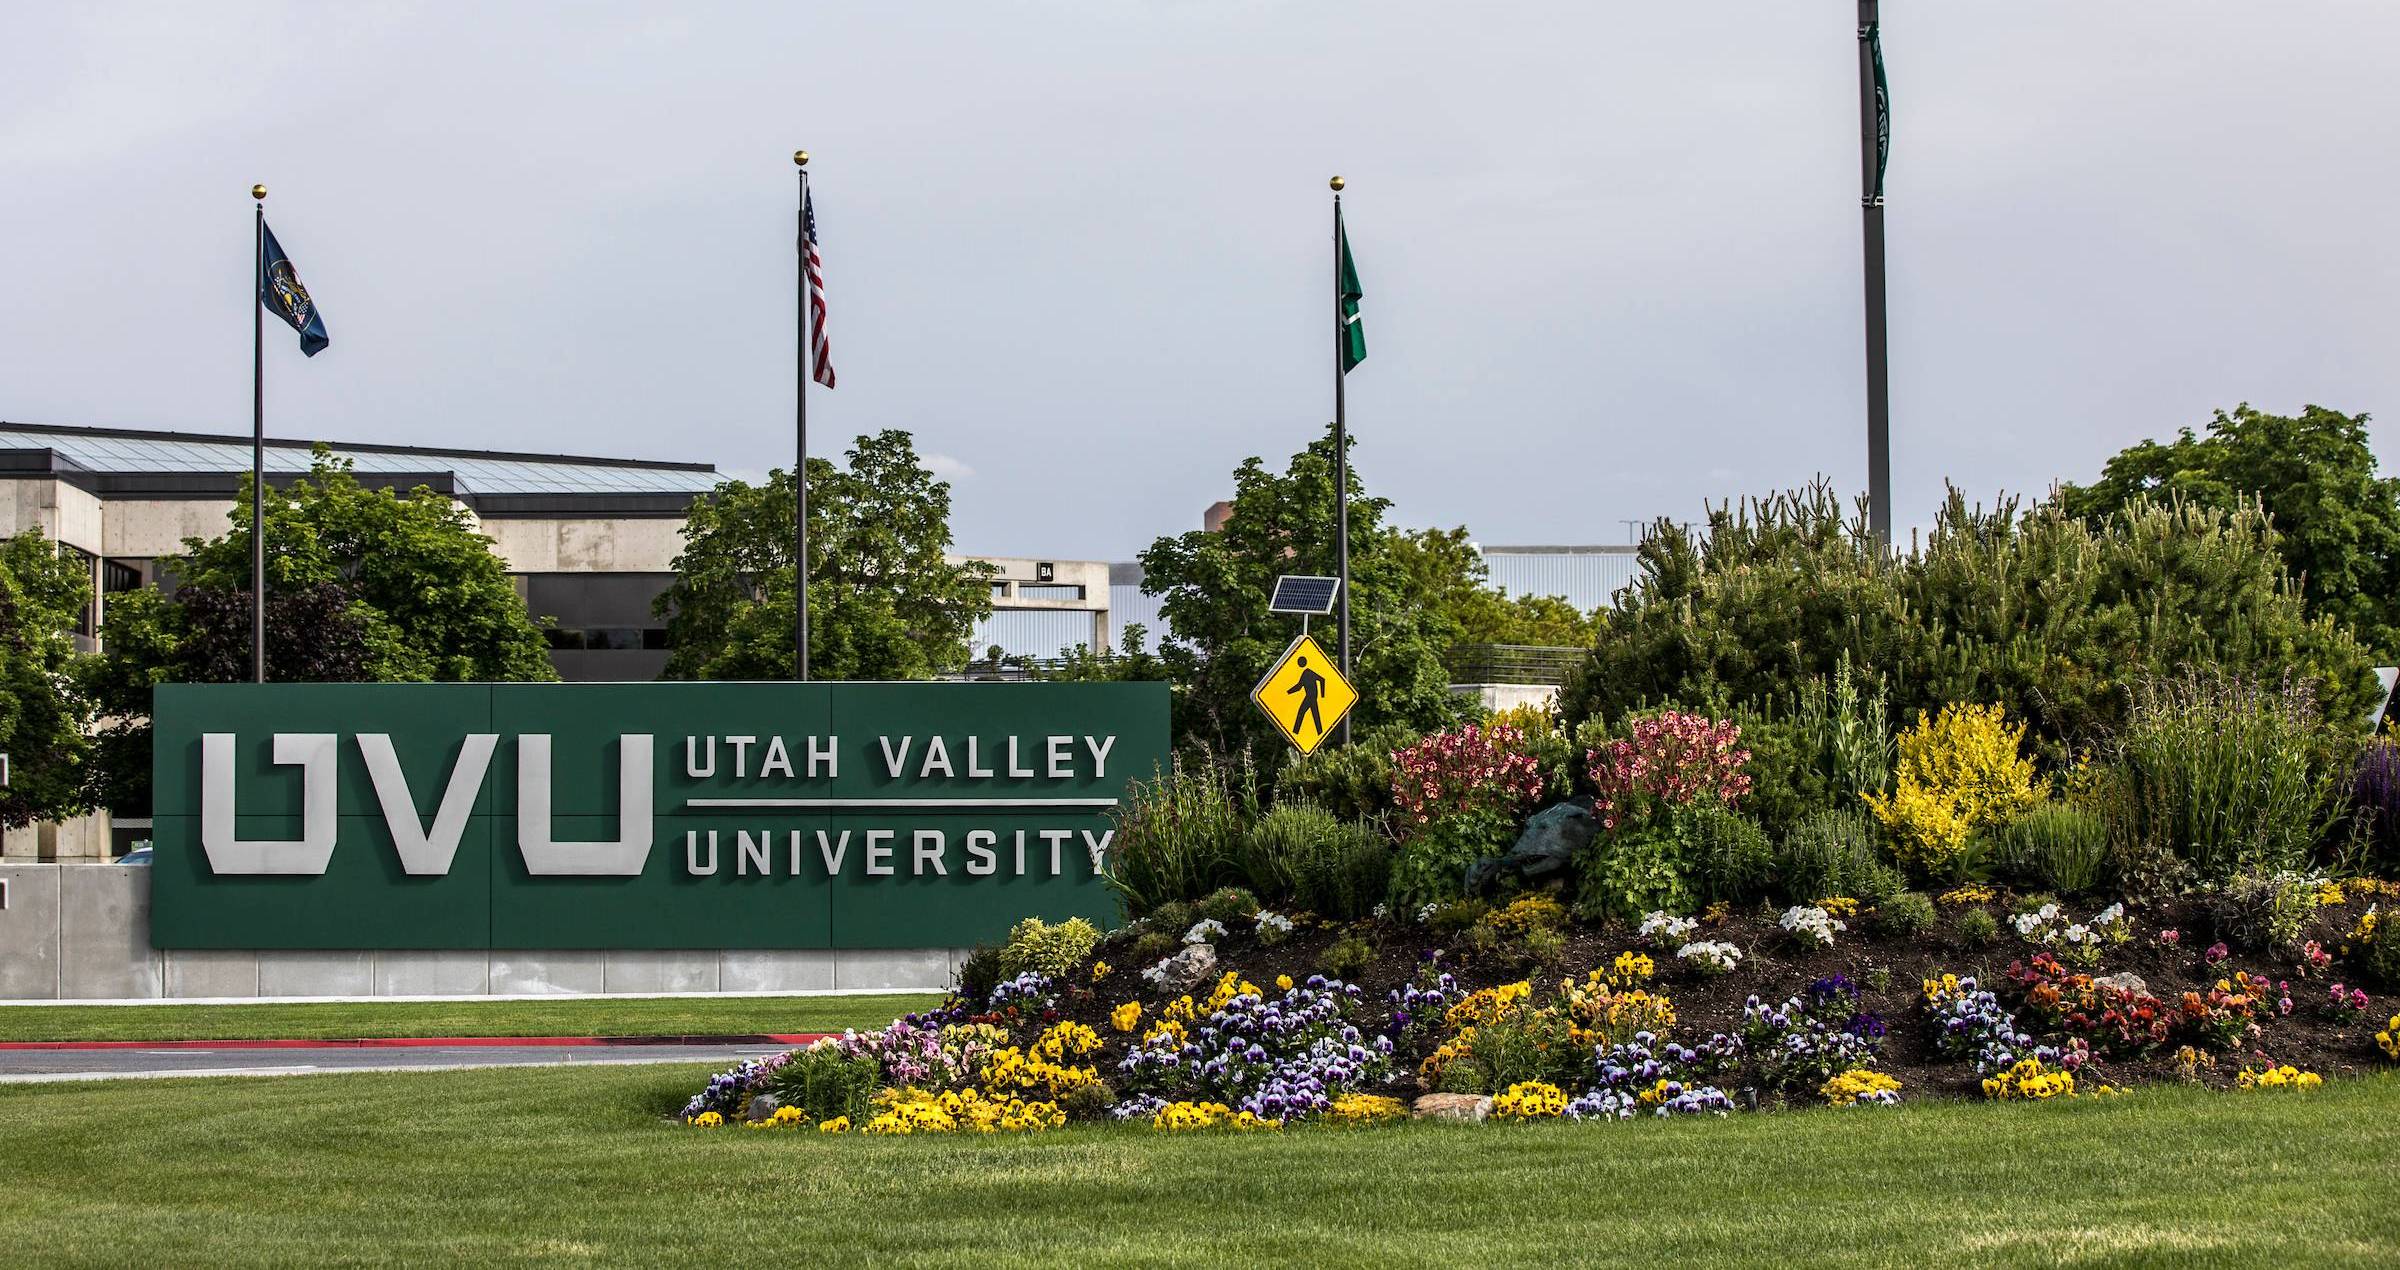 Image of the UVU signage in front of the Orem campus, with a flower patch right beside it